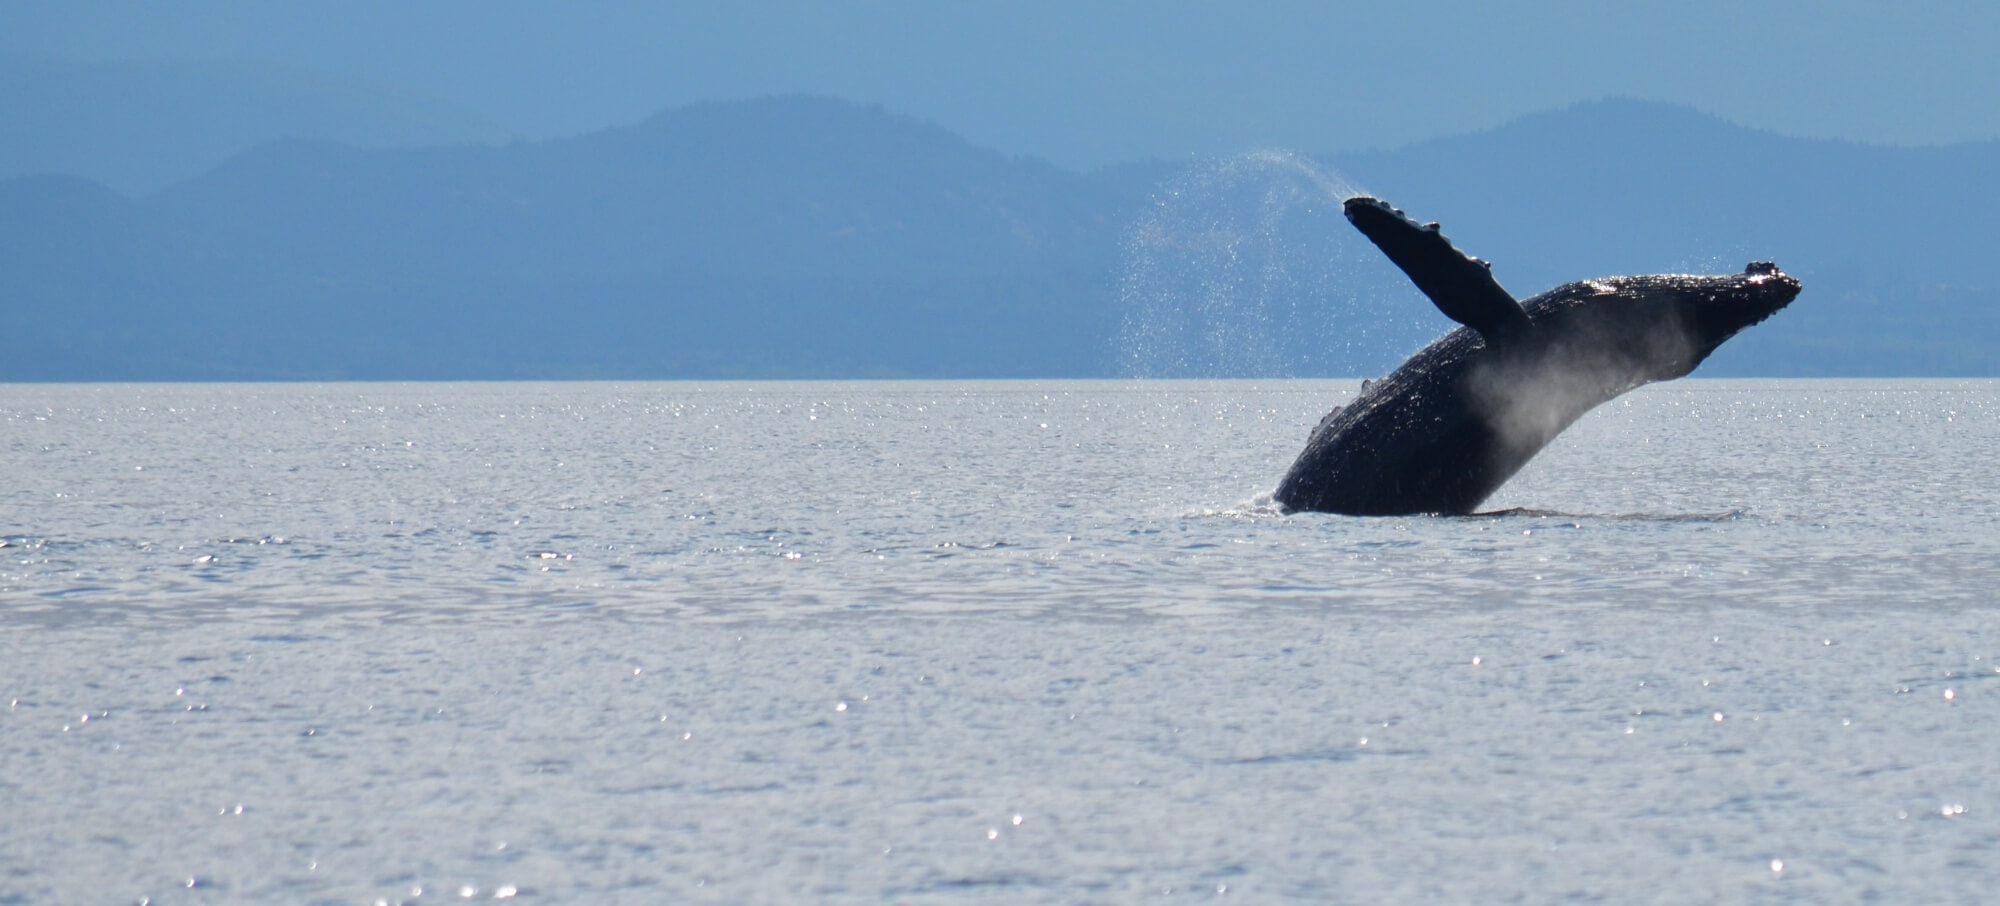 Humpback whale breaching the water